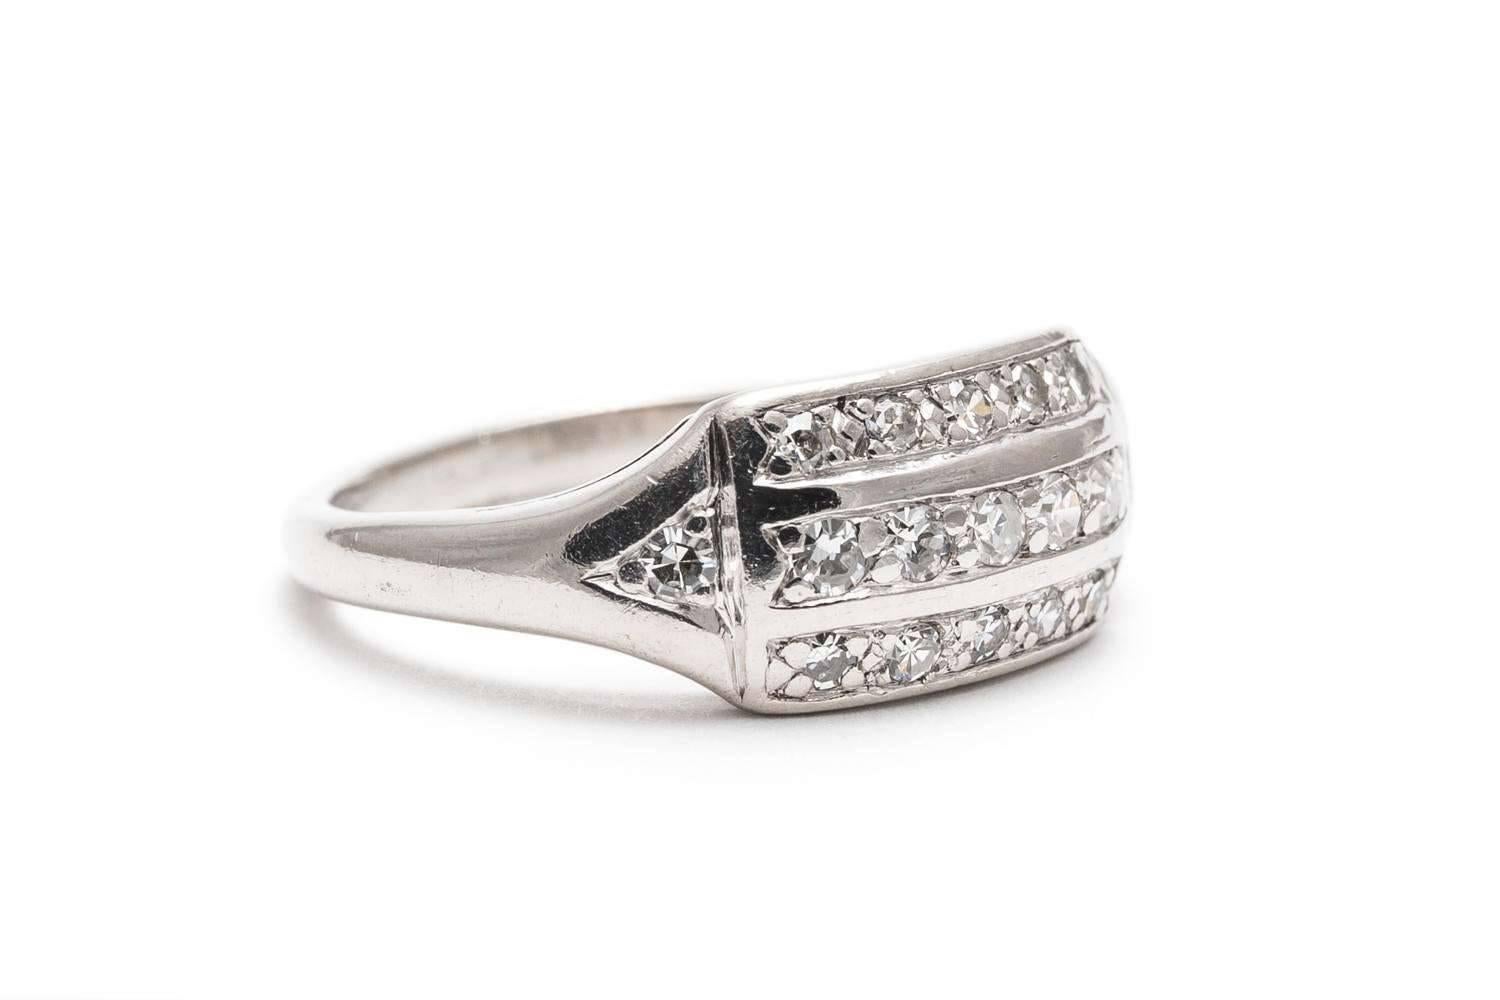 An art deco period diamond wedding band in luxurious platinum. Set with seventeen antique Swiss cut diamonds their ring features all top quality VS clarity and F/G colorless diamonds. Weighing a combined 0.51 carats, the seventeen diamonds are